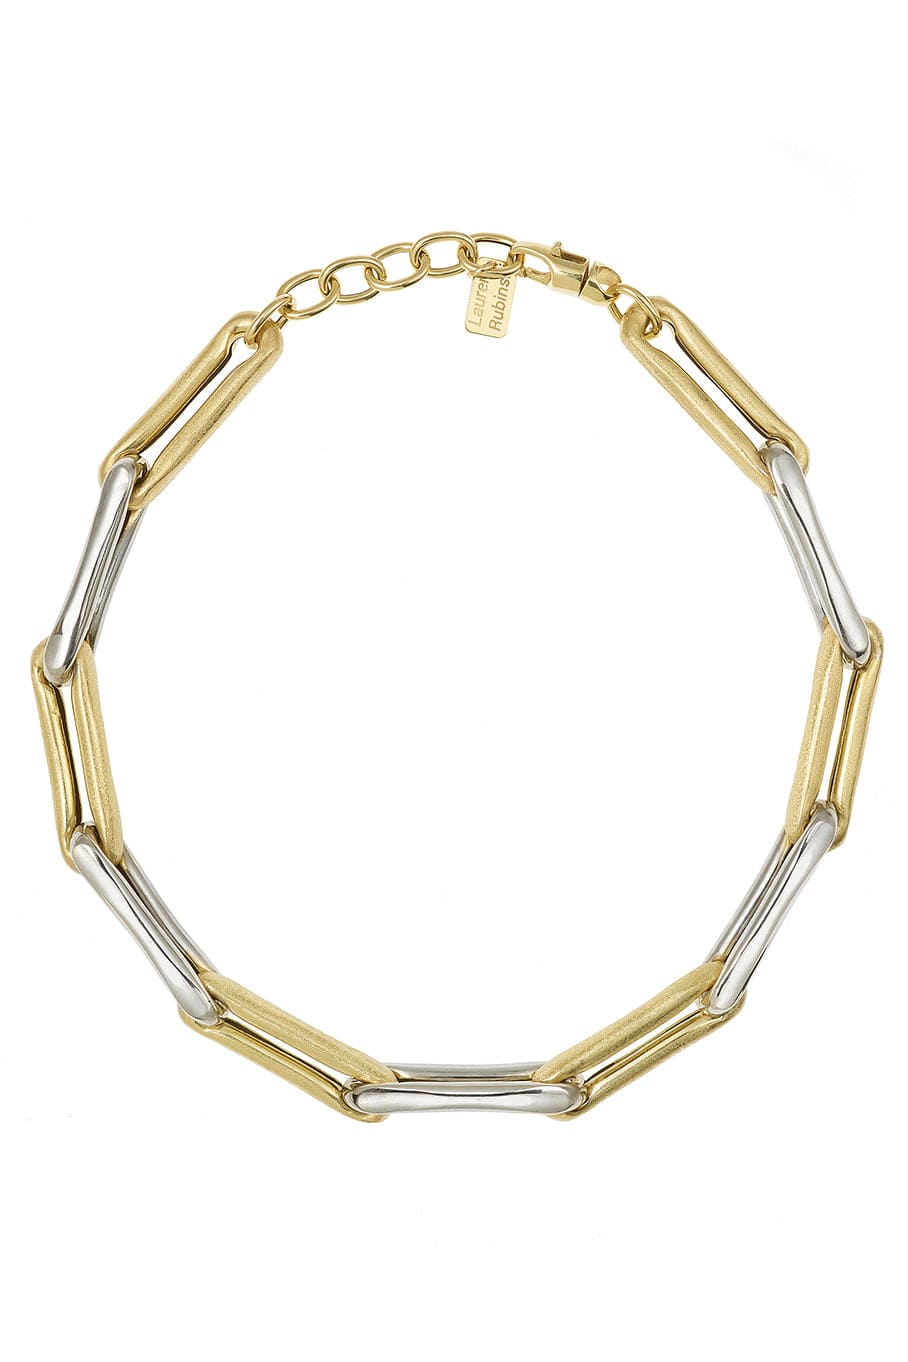 LAUREN RUBINSKI-LR3 - Extra Large Yellow and White Gold Necklace-YELLOW GOLD